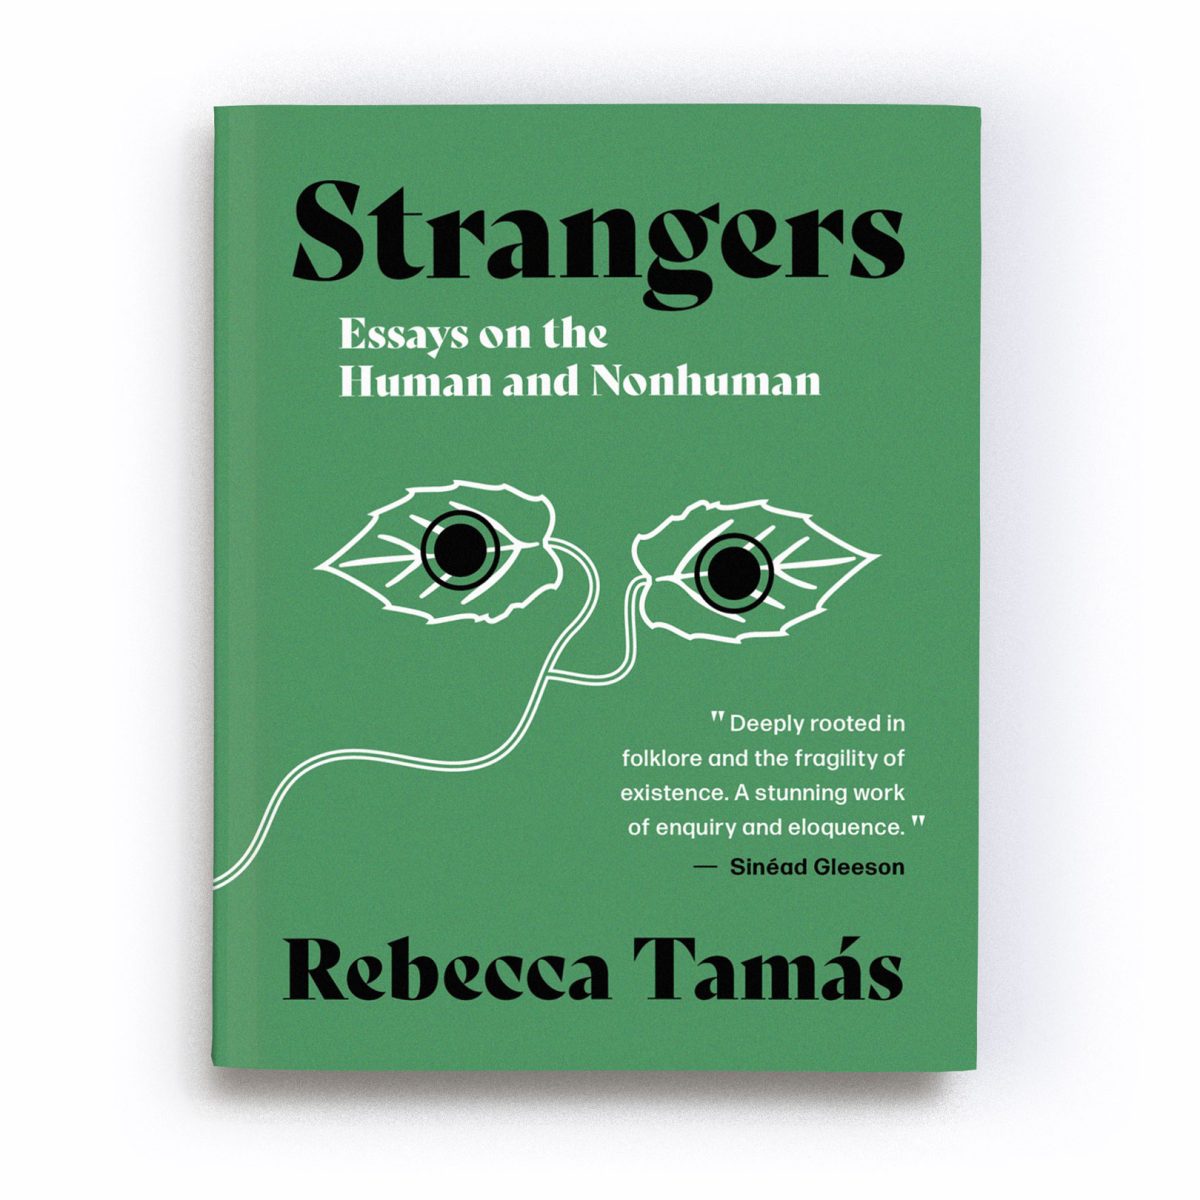 A render of the first edition of the book ‘Strangers: Essays on the Human and Nonhuman’. In the centre of the cover is an abstract motif of two white leaves, joined by a stalk, which winds from the centre to the bottom left of the cover. A black filled circle, outlined with a ring, overlays each leaf, giving the impression the leaves are a pair of eyes staring out at us from the cover. A quote by Sinéad Gleeson reads: 'Tamás’ essays are deeply rooted in folklore and the fragility of existence. A stunning work of enquiry and eloquence.' The text is a mixture of white and black in colour and is placed on an emerald green background.